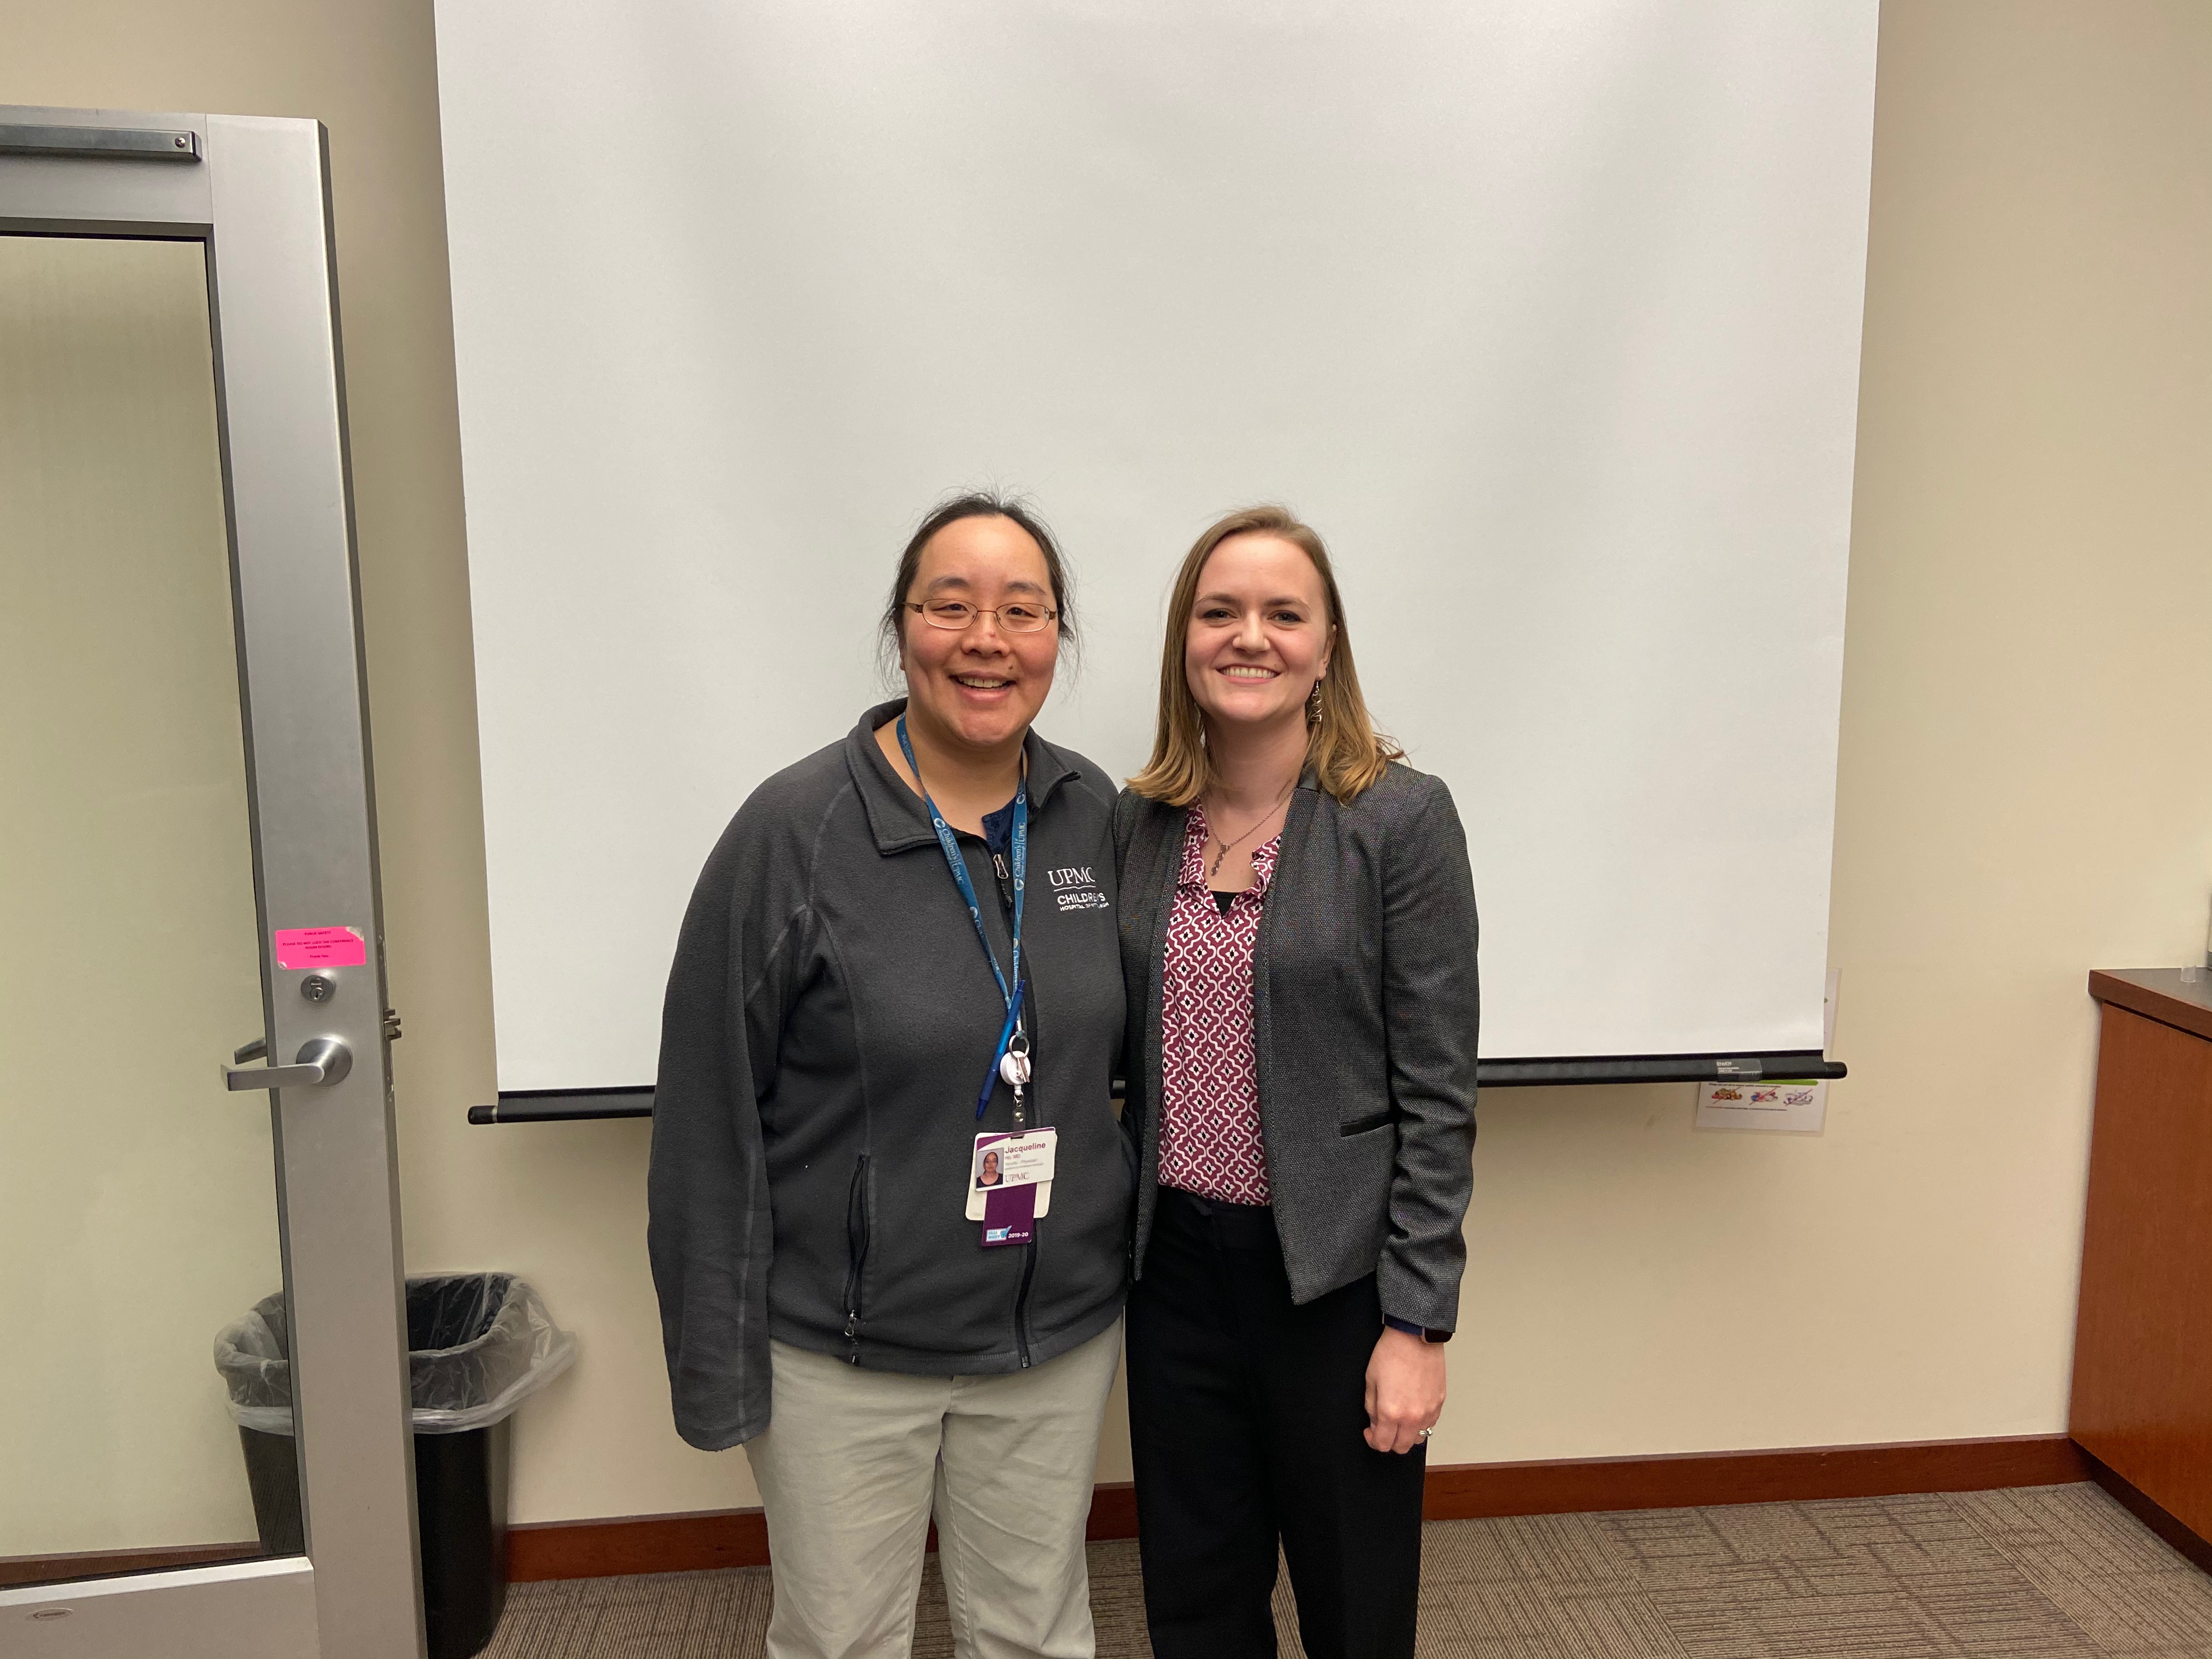 Dr. Jacqueline Ho and Dr. Shelby Hemker's thesis defense